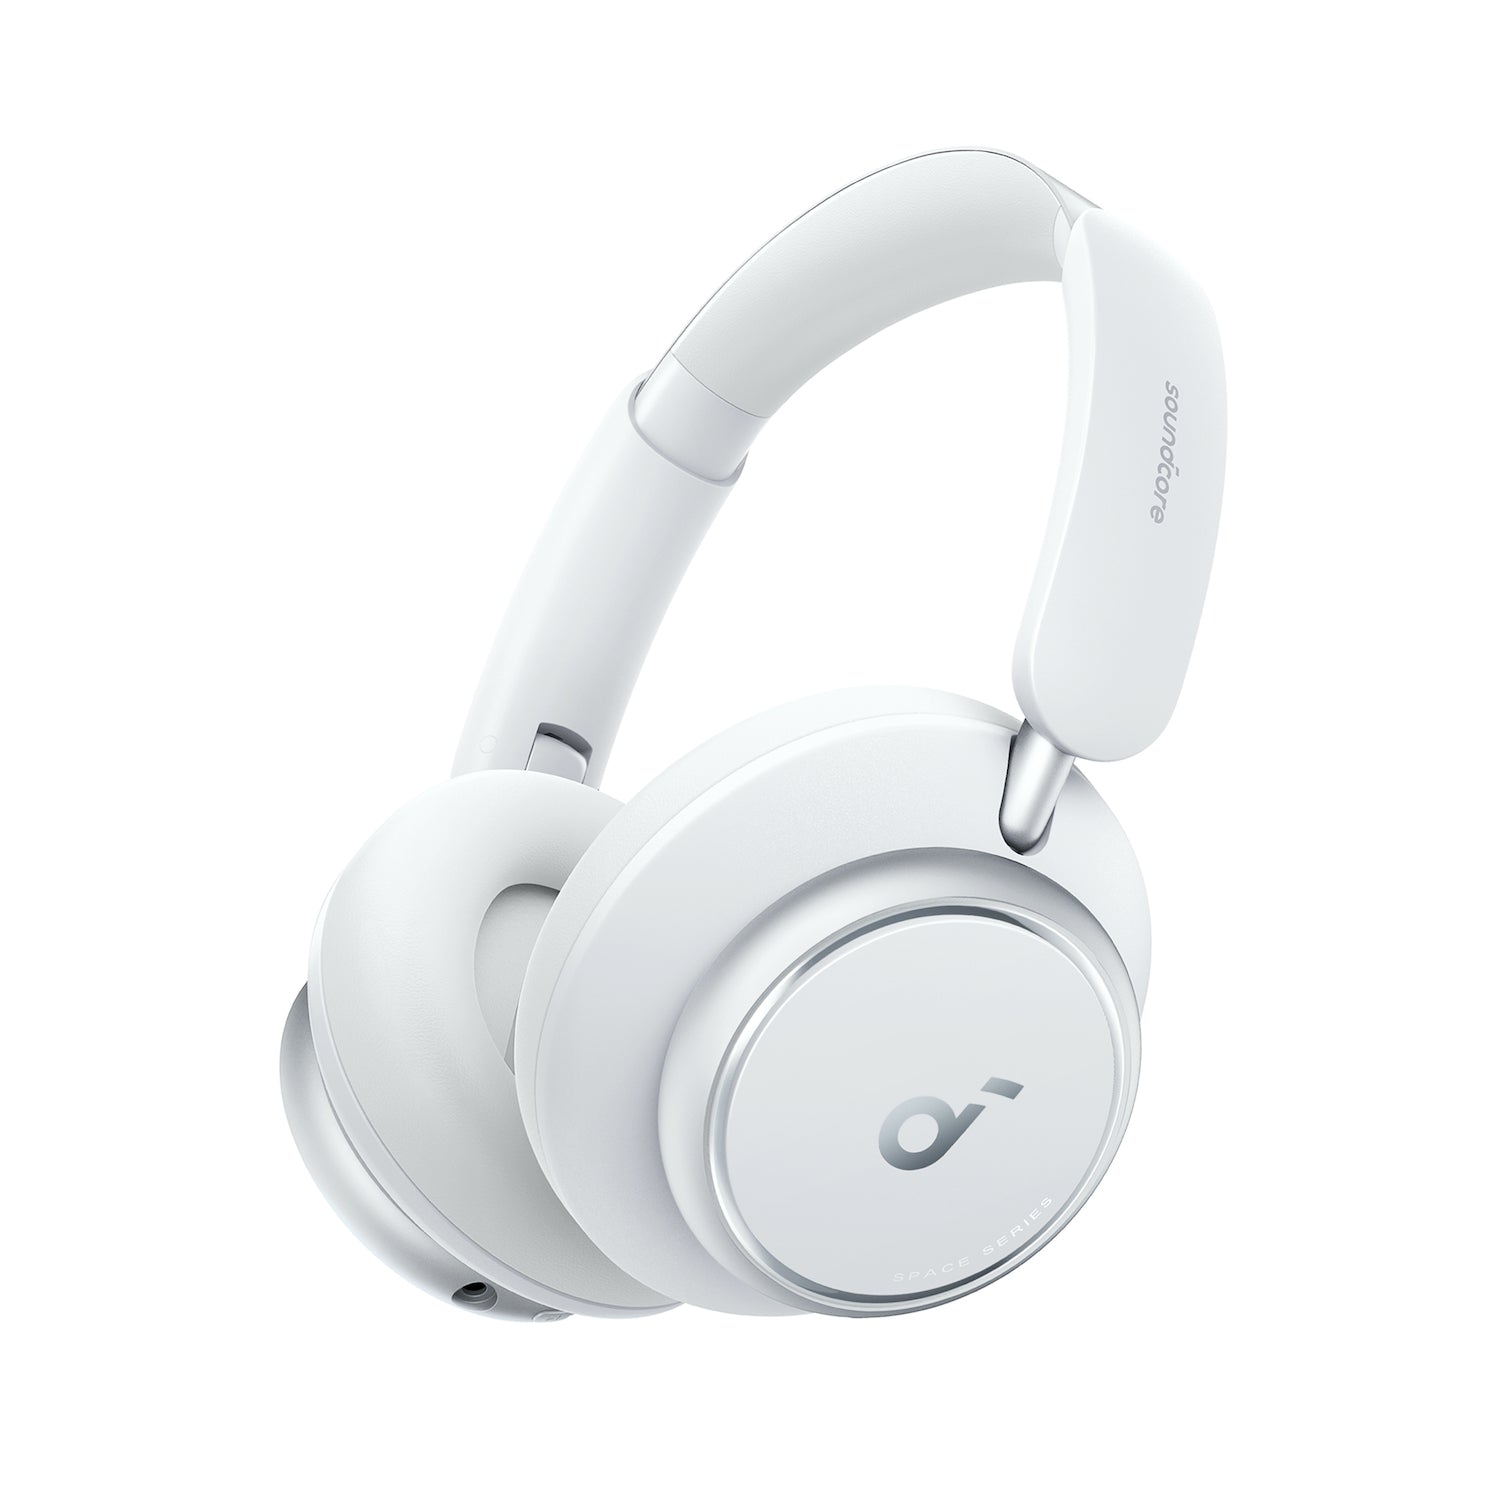 Buy Space Q45 All-New Noise Cancelling Headphones - soundcore